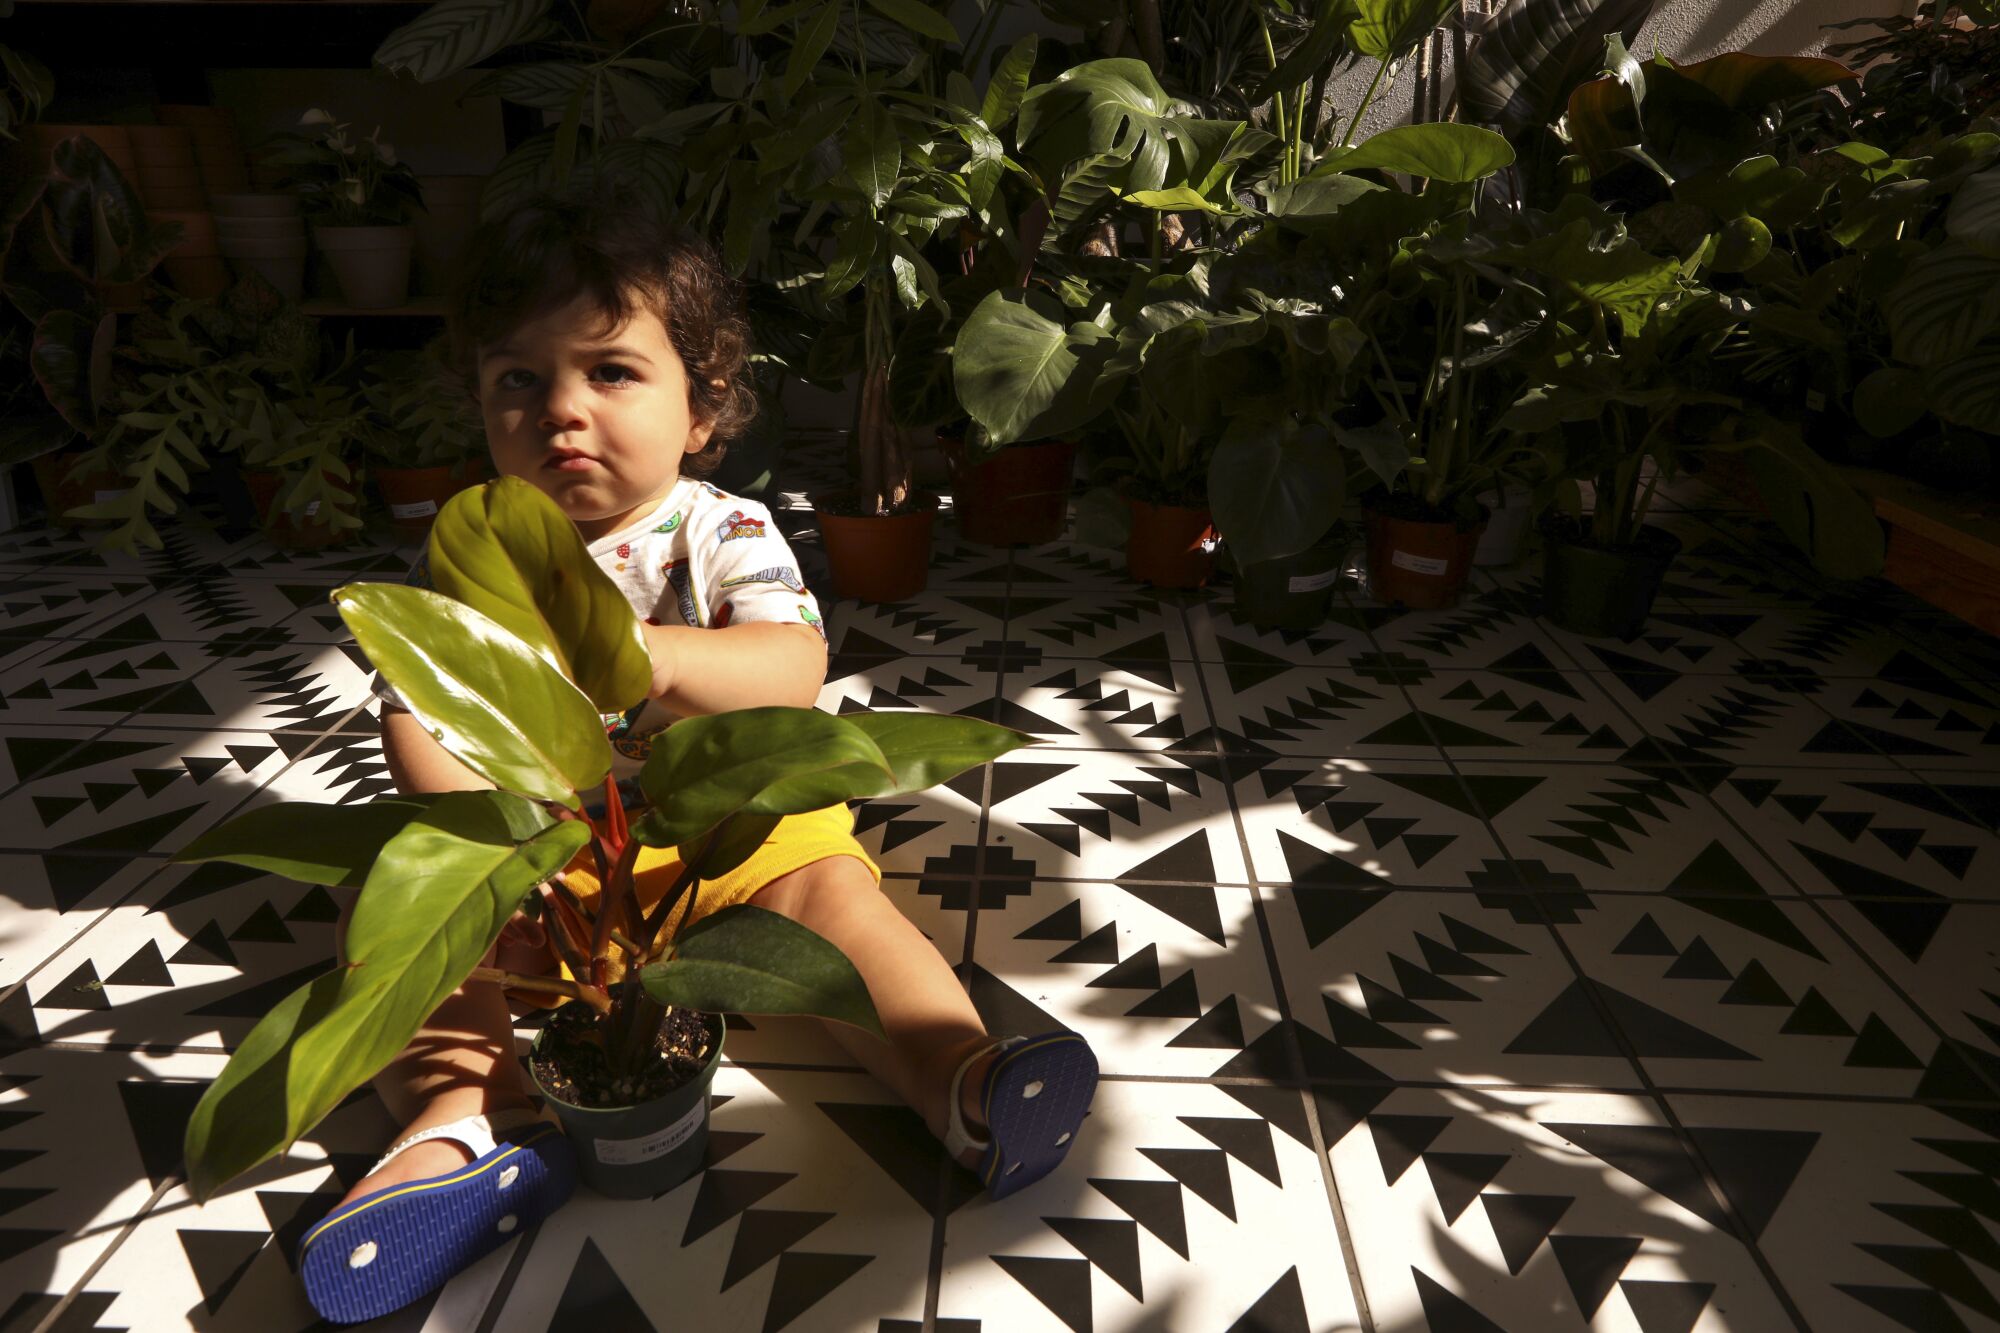 One-year-old Kylo Bazic sits with a plant on the floor of his parents' shop.